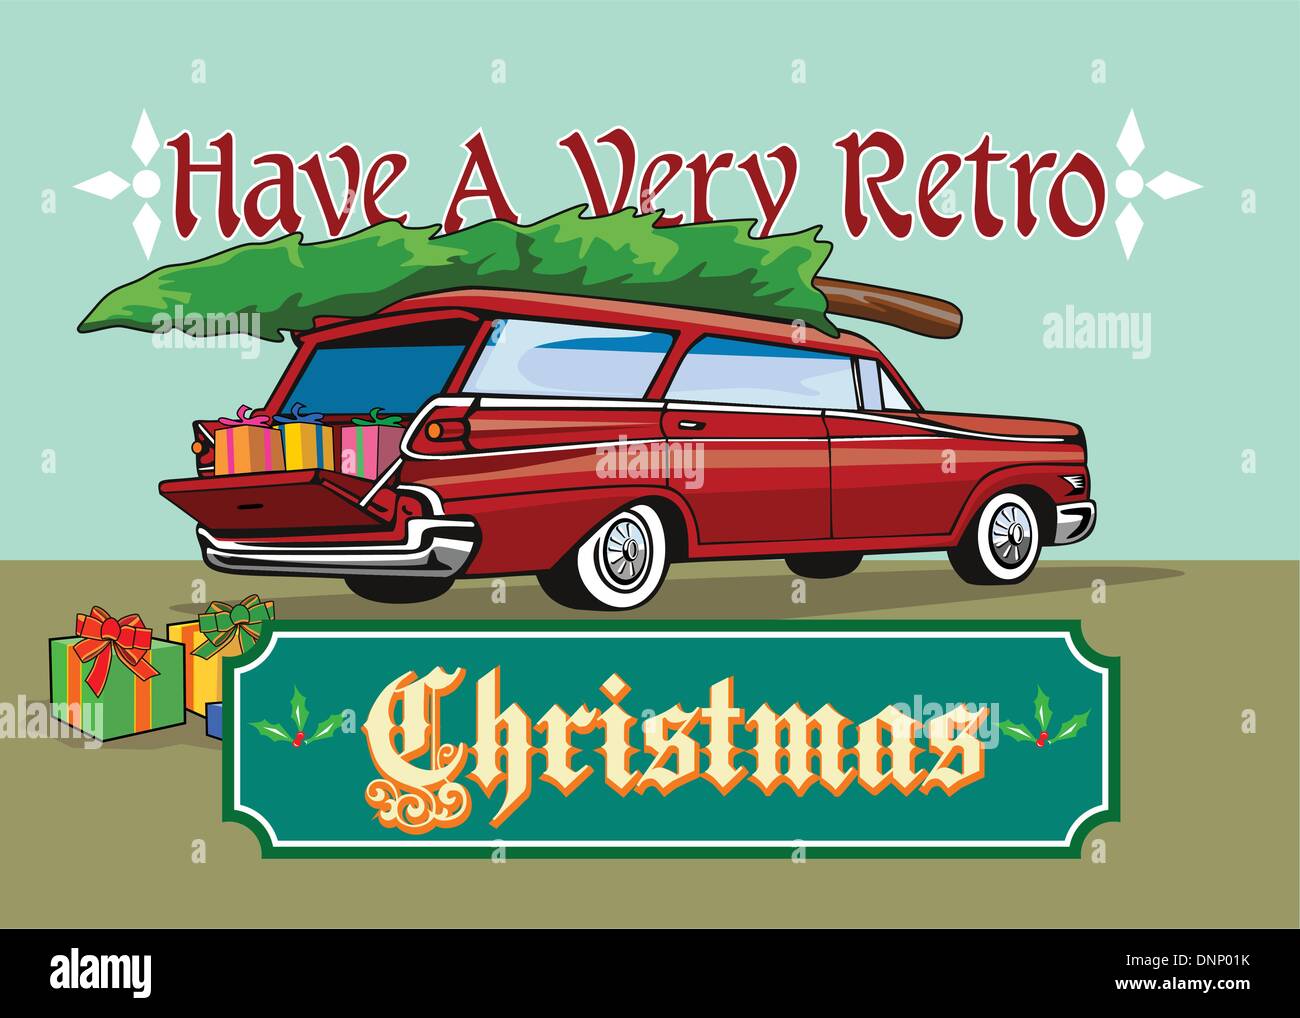 Greeting card poster illustration showing a christmas tree on top of vintage station wagon automobile with gifts presents in the car boot and words Have a very retro christmas'.' Stock Vector